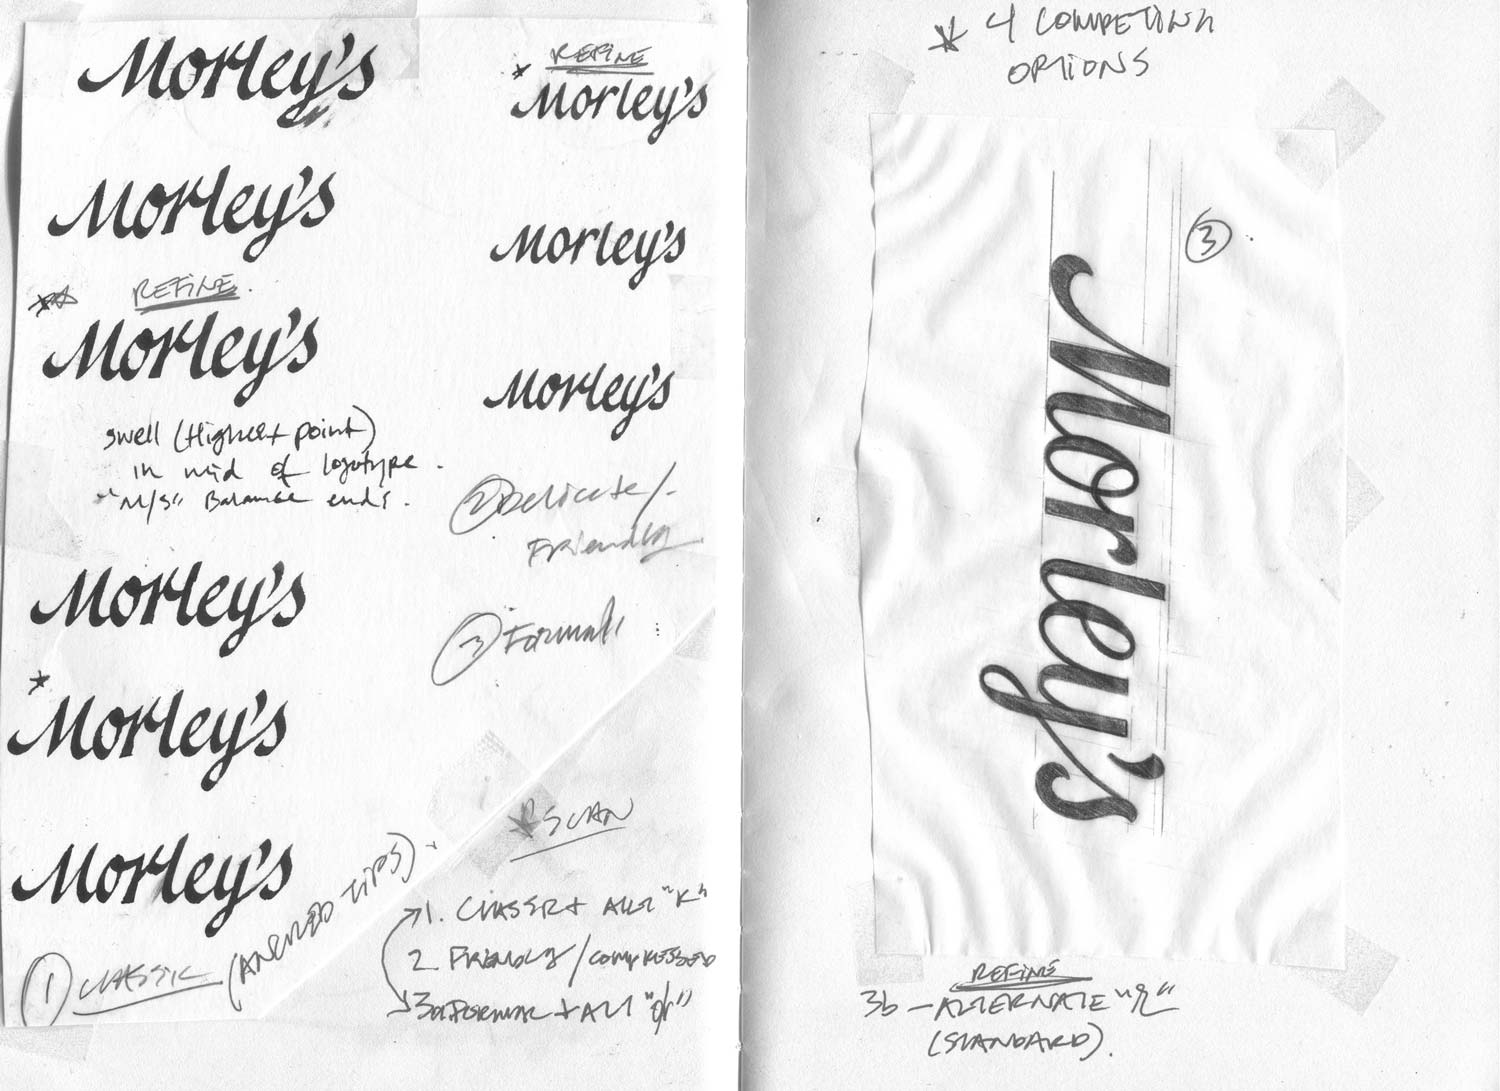 morley's logo design process showcasing calligraphy and a refined pencil illustration